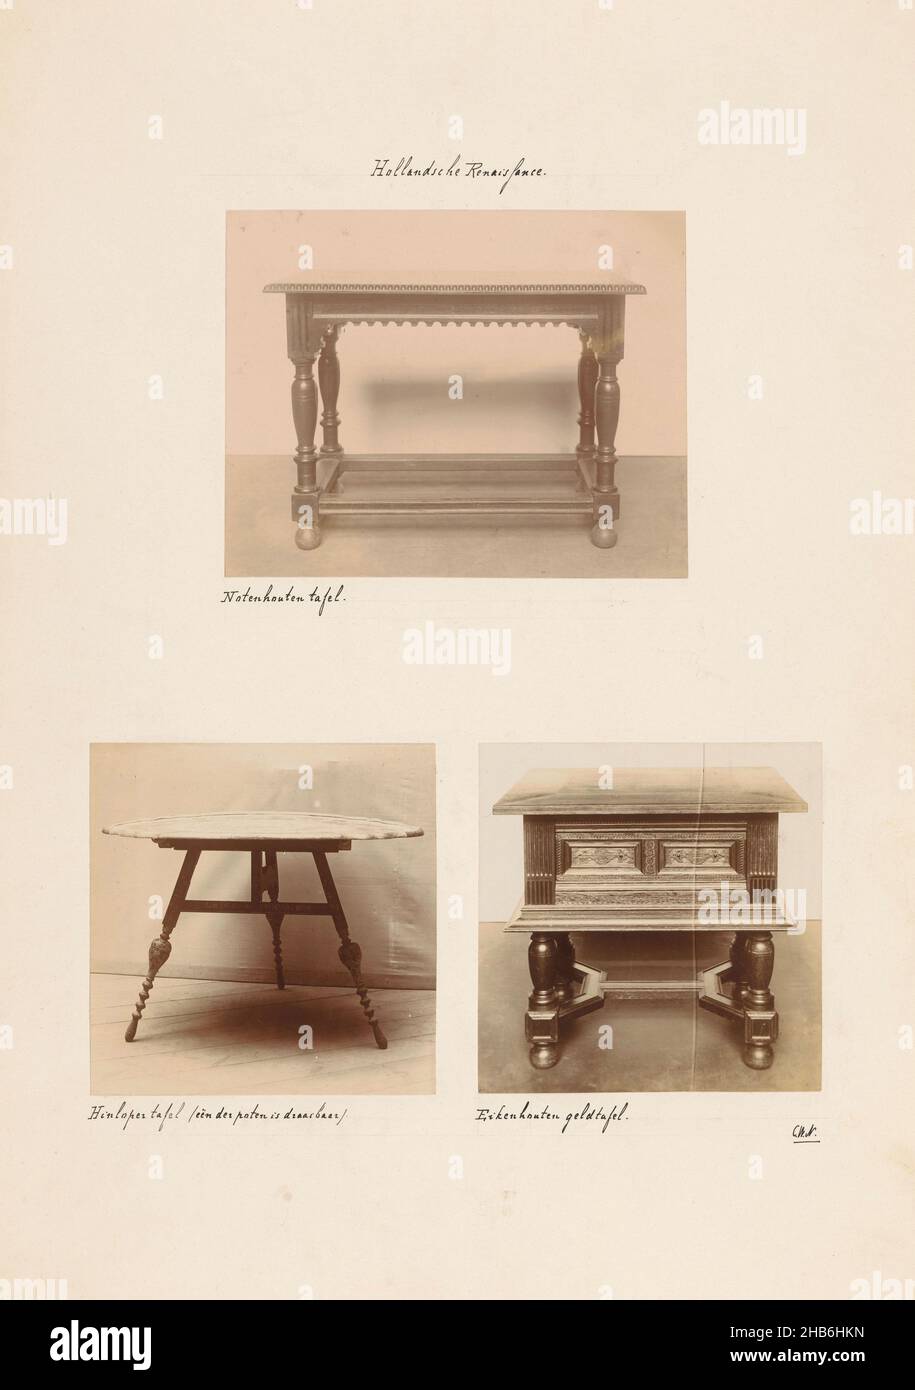 Overview of three wooden tables, Above a walnut table, below left a three-legged Hindelooper table, below right an oak money table., anonymous, Netherlands, c. 1875 - c. 1900, cardboard, photographic support, height 446 mm × width 315 mm Stock Photo